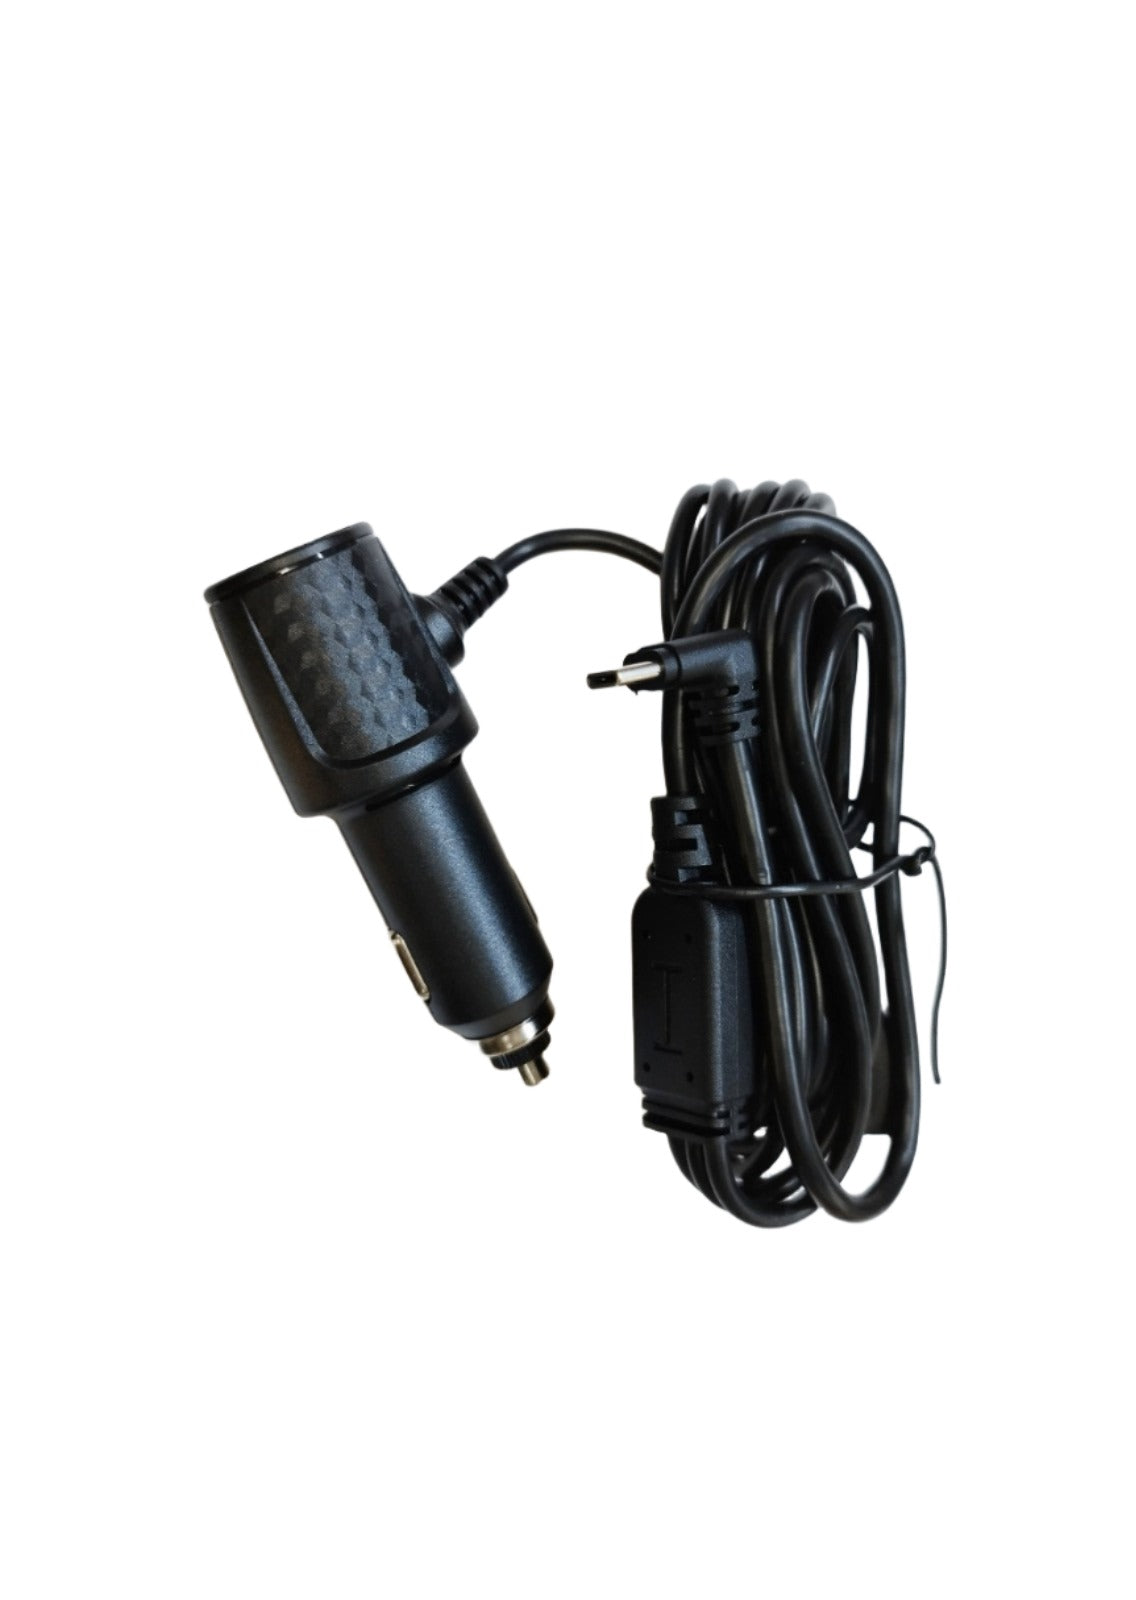 A10 power cable